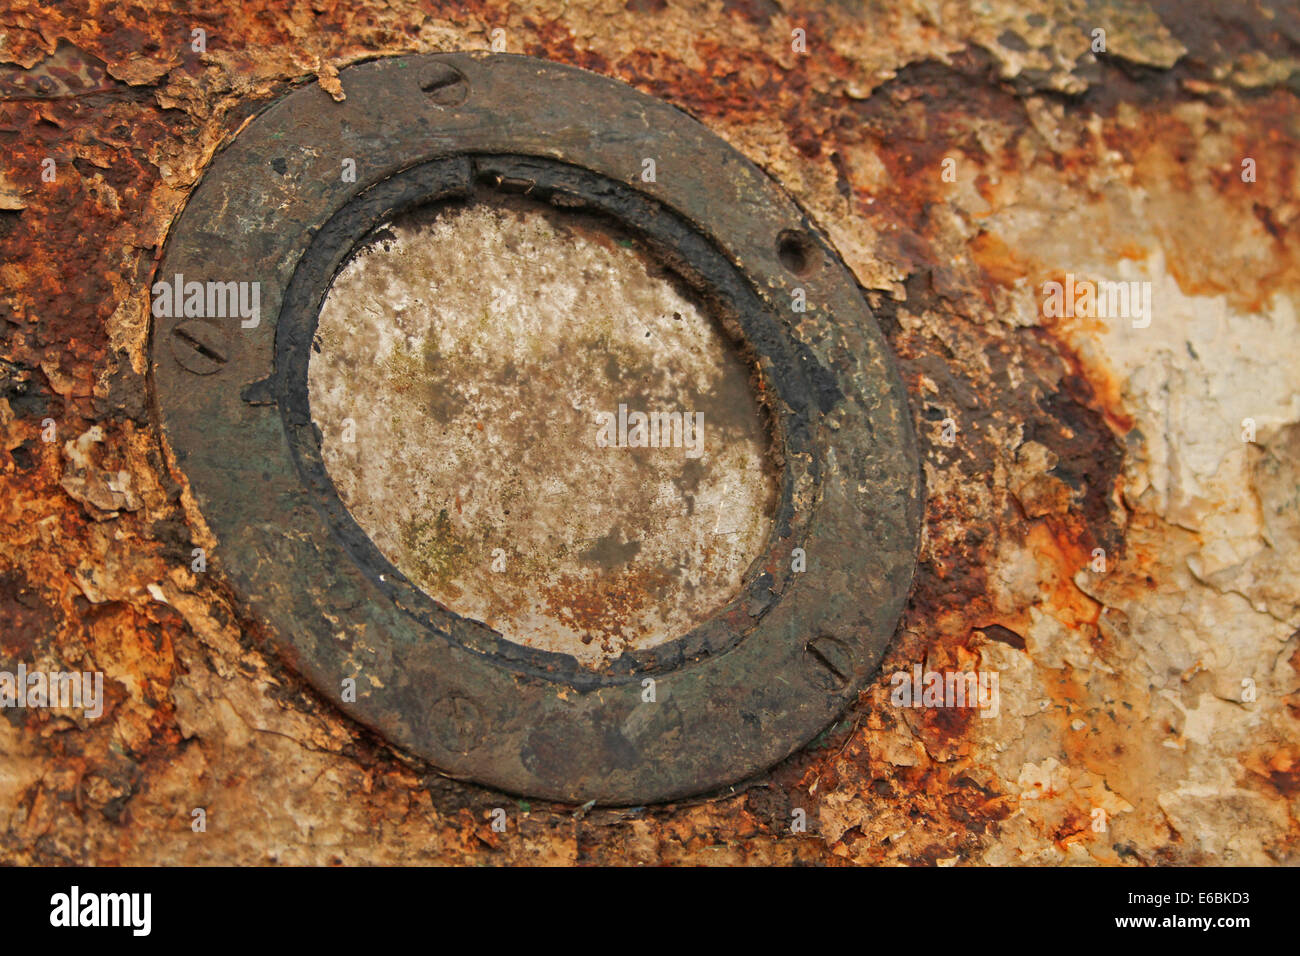 Abstract of textured rusty porthole window on a small boat showing detail of corrosion and oxidization Stock Photo